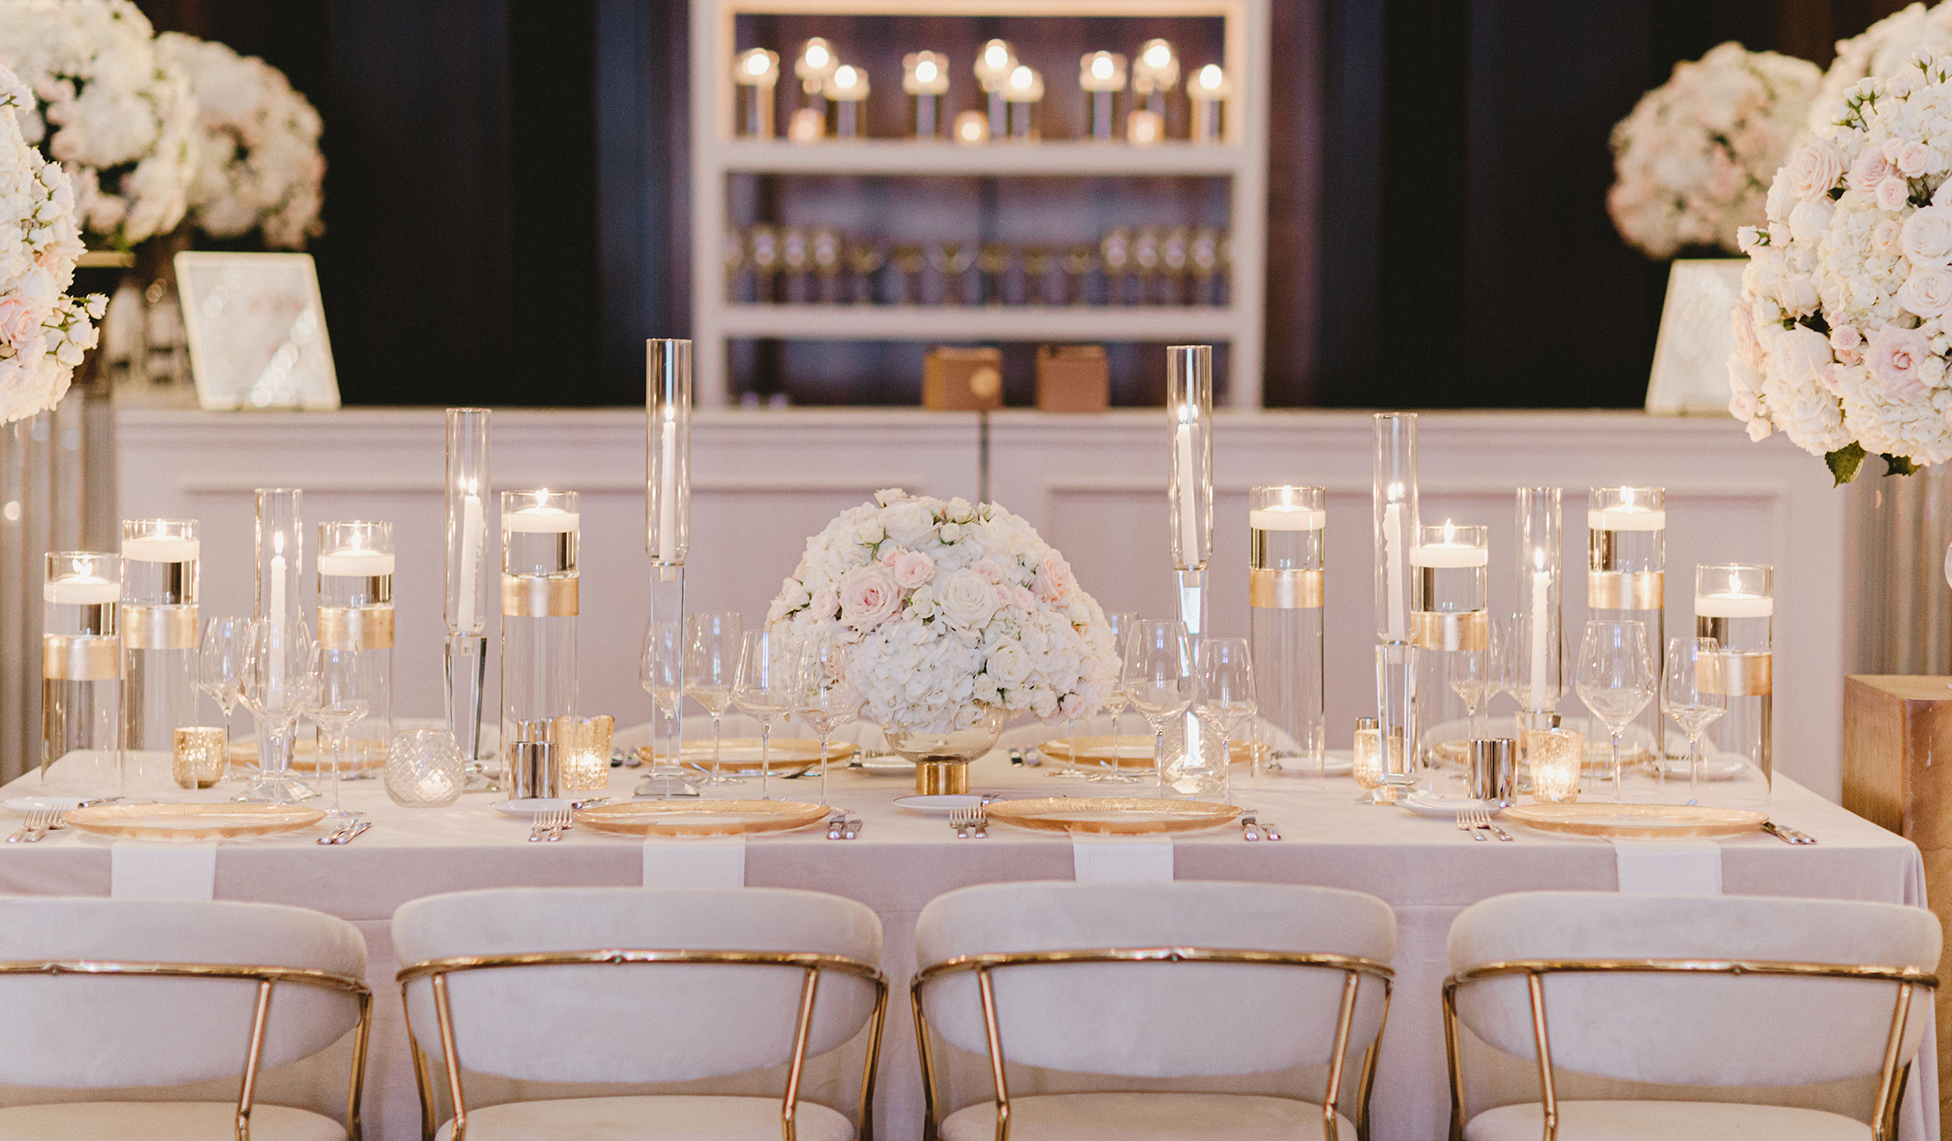 A wedding reception table is set up with elegant candles, white flowers and gold accents for a romantic ballroom wedding at The Post Oak Hotel in Houston, TX.